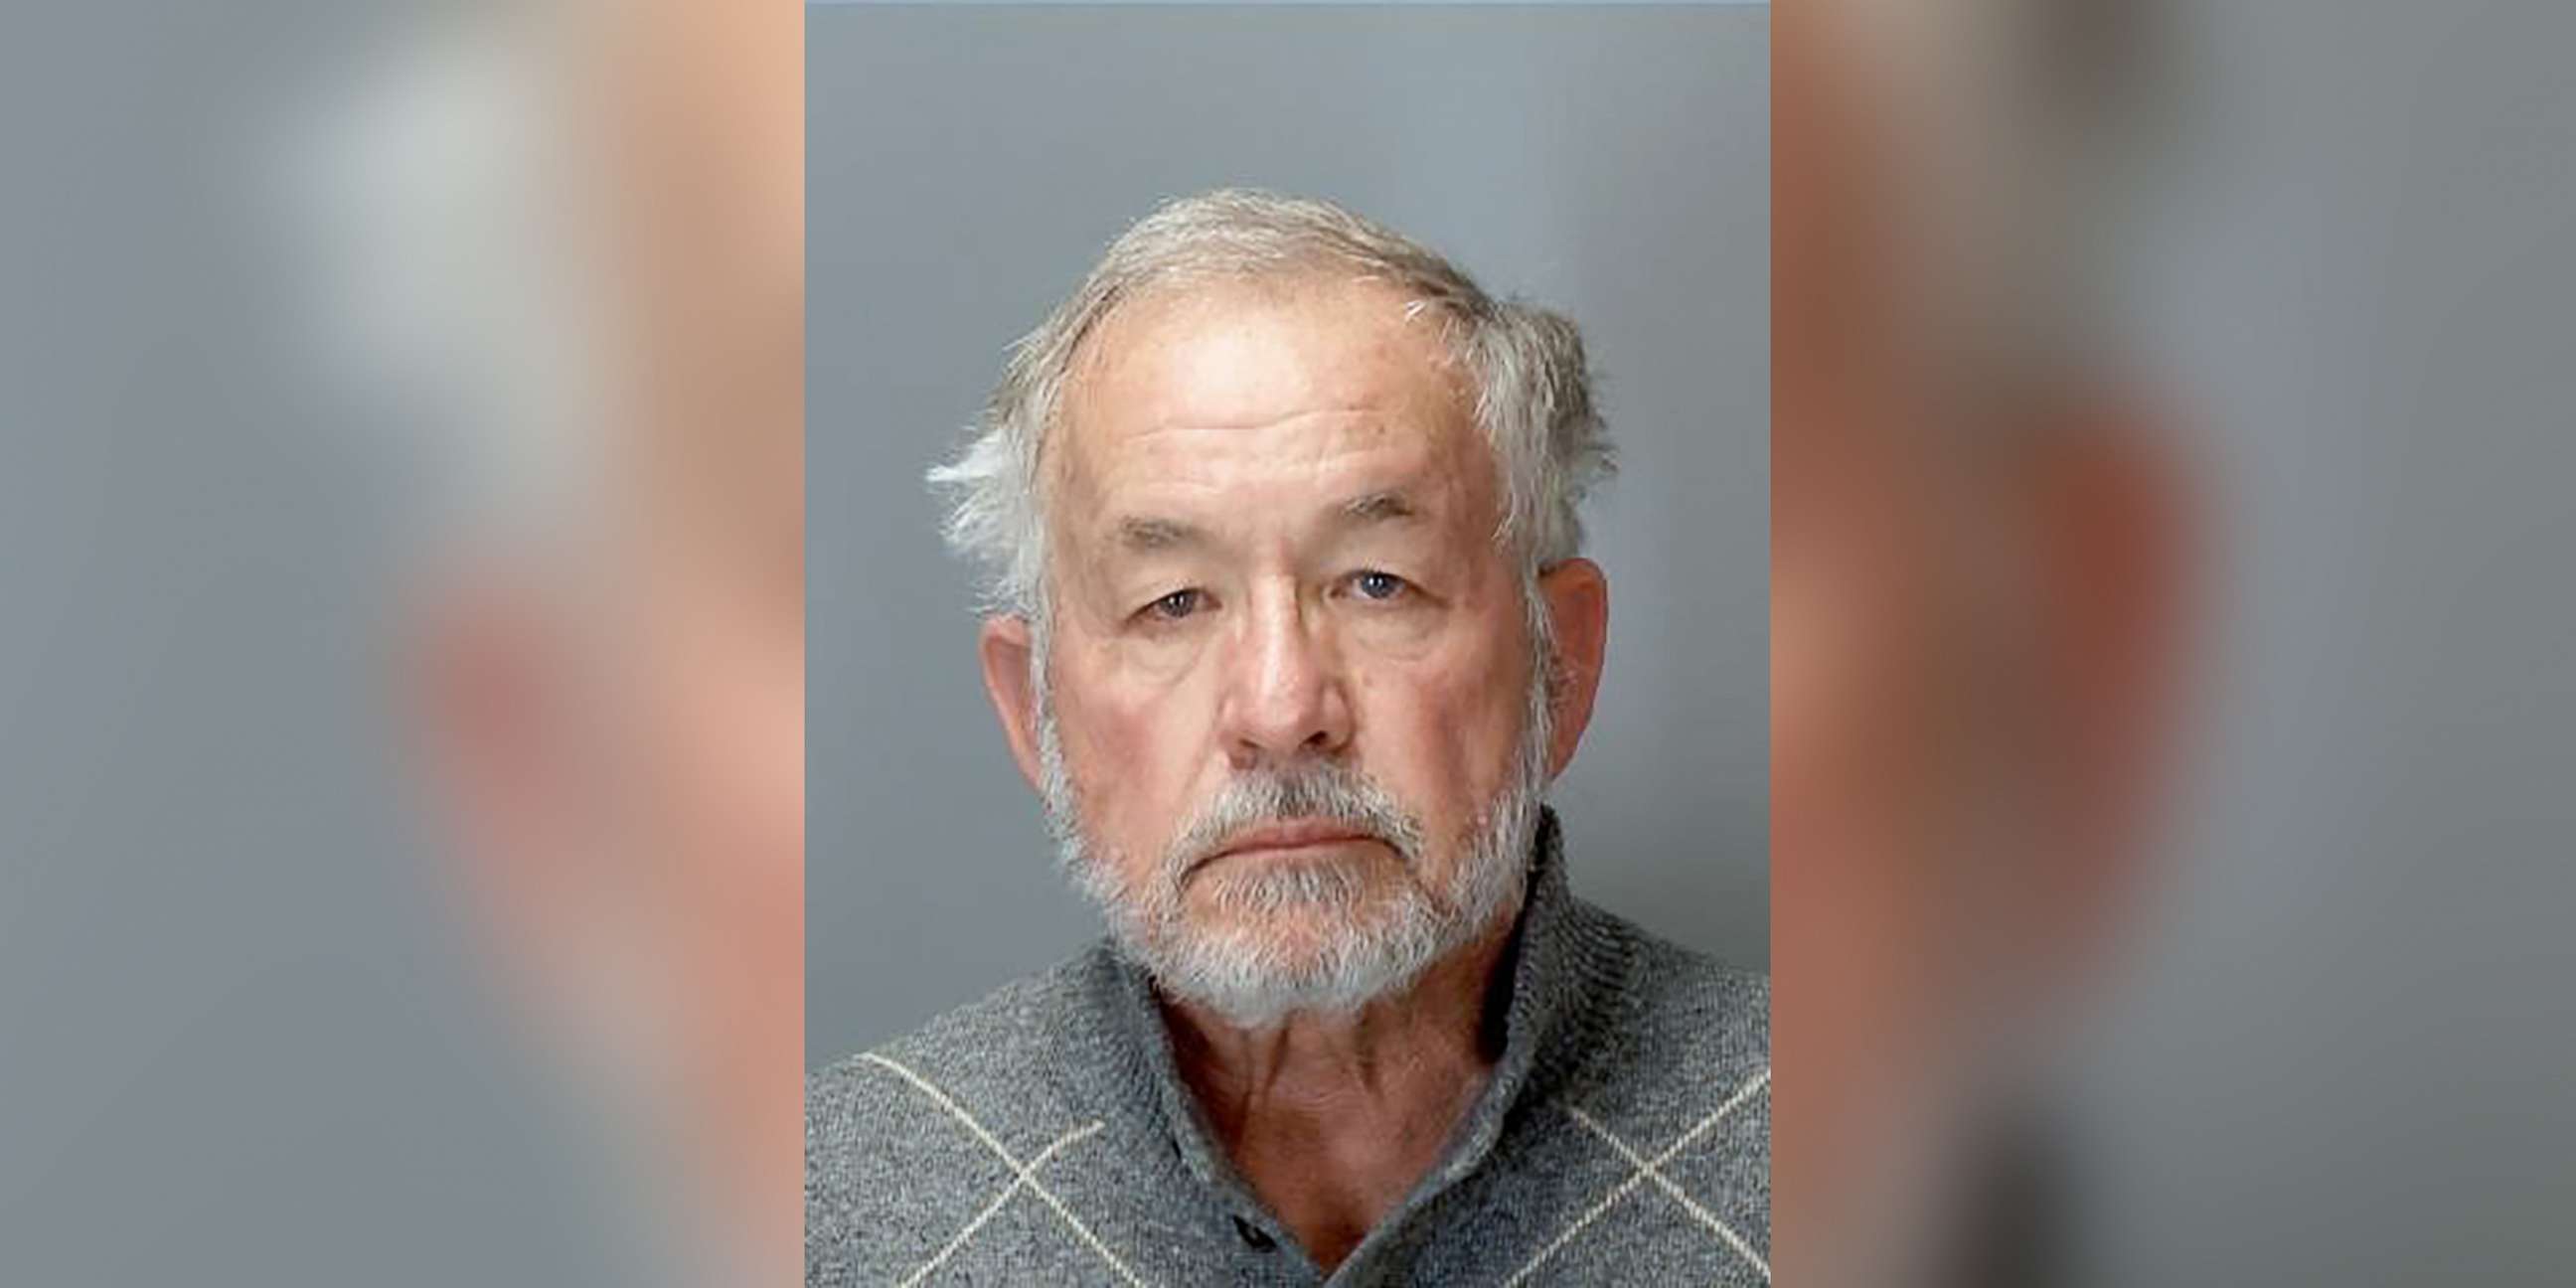 PHOTO: The former Dean of the MSU College of Osteopathic Medicine William Strampel is pictured in an undated booking photo released by the Michigan Attorney General's office.